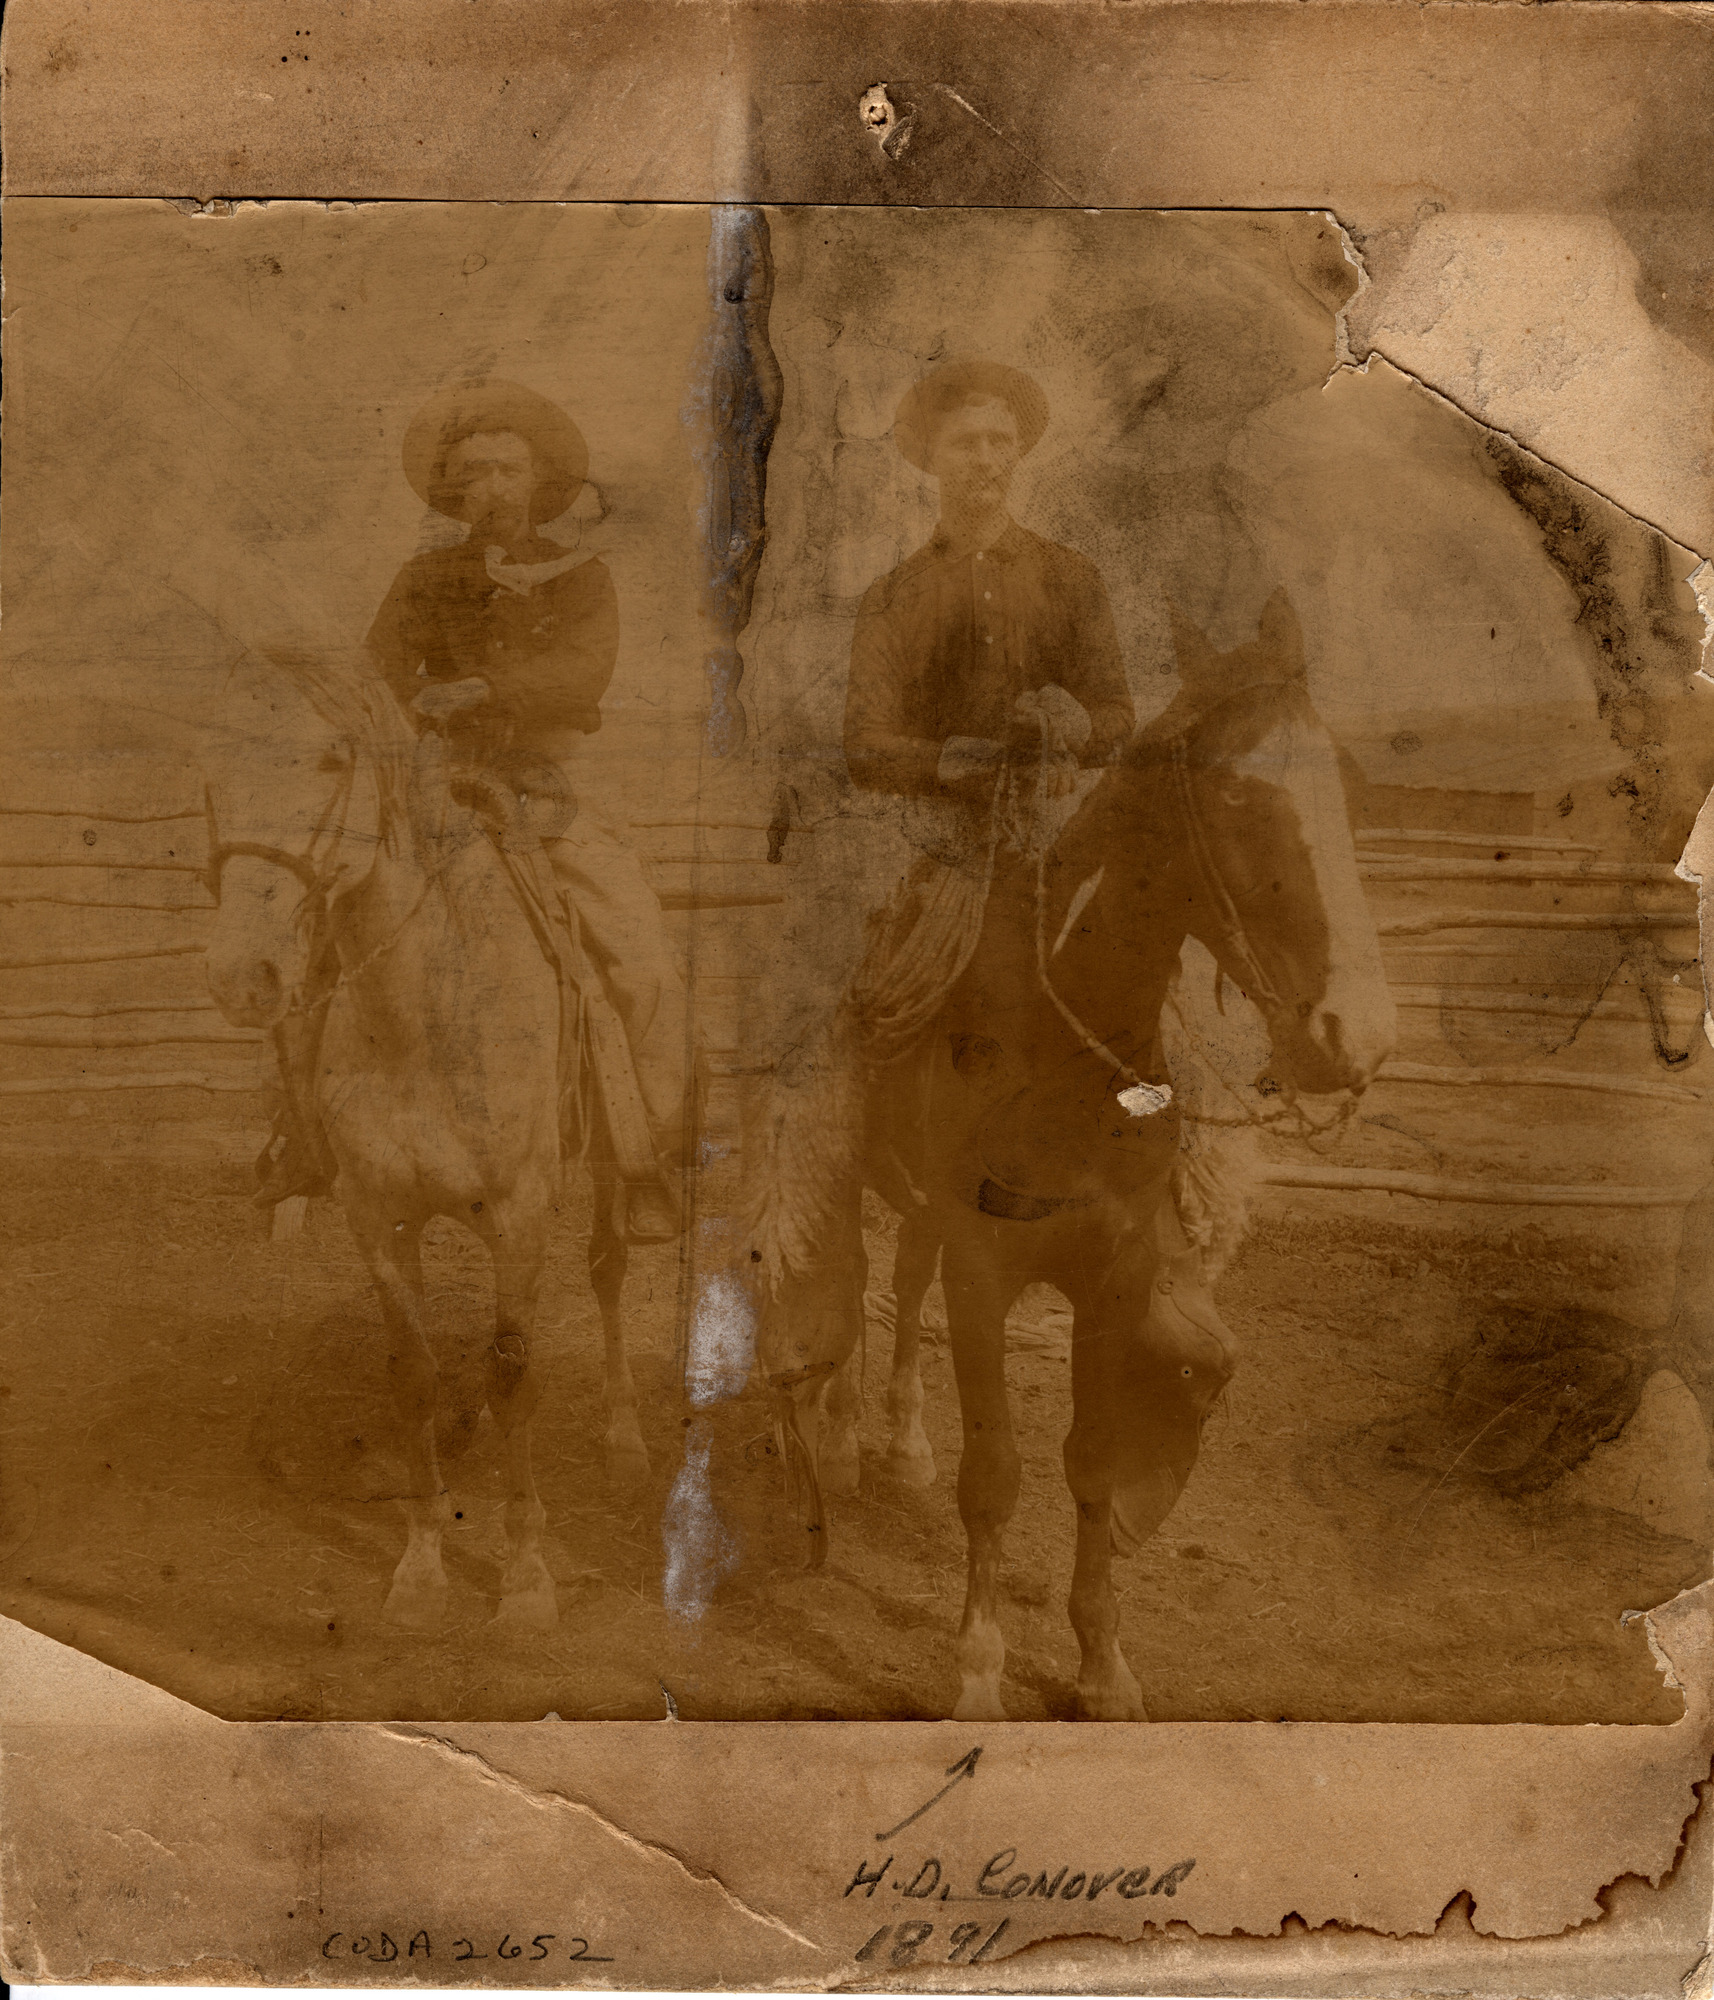 Heavily faded sepia toned photograph of two men on horses in front of a wooden fence. Handwritten text with arrow at the bottom reads: "H.D. Conover 1891" and "CODA 2652"